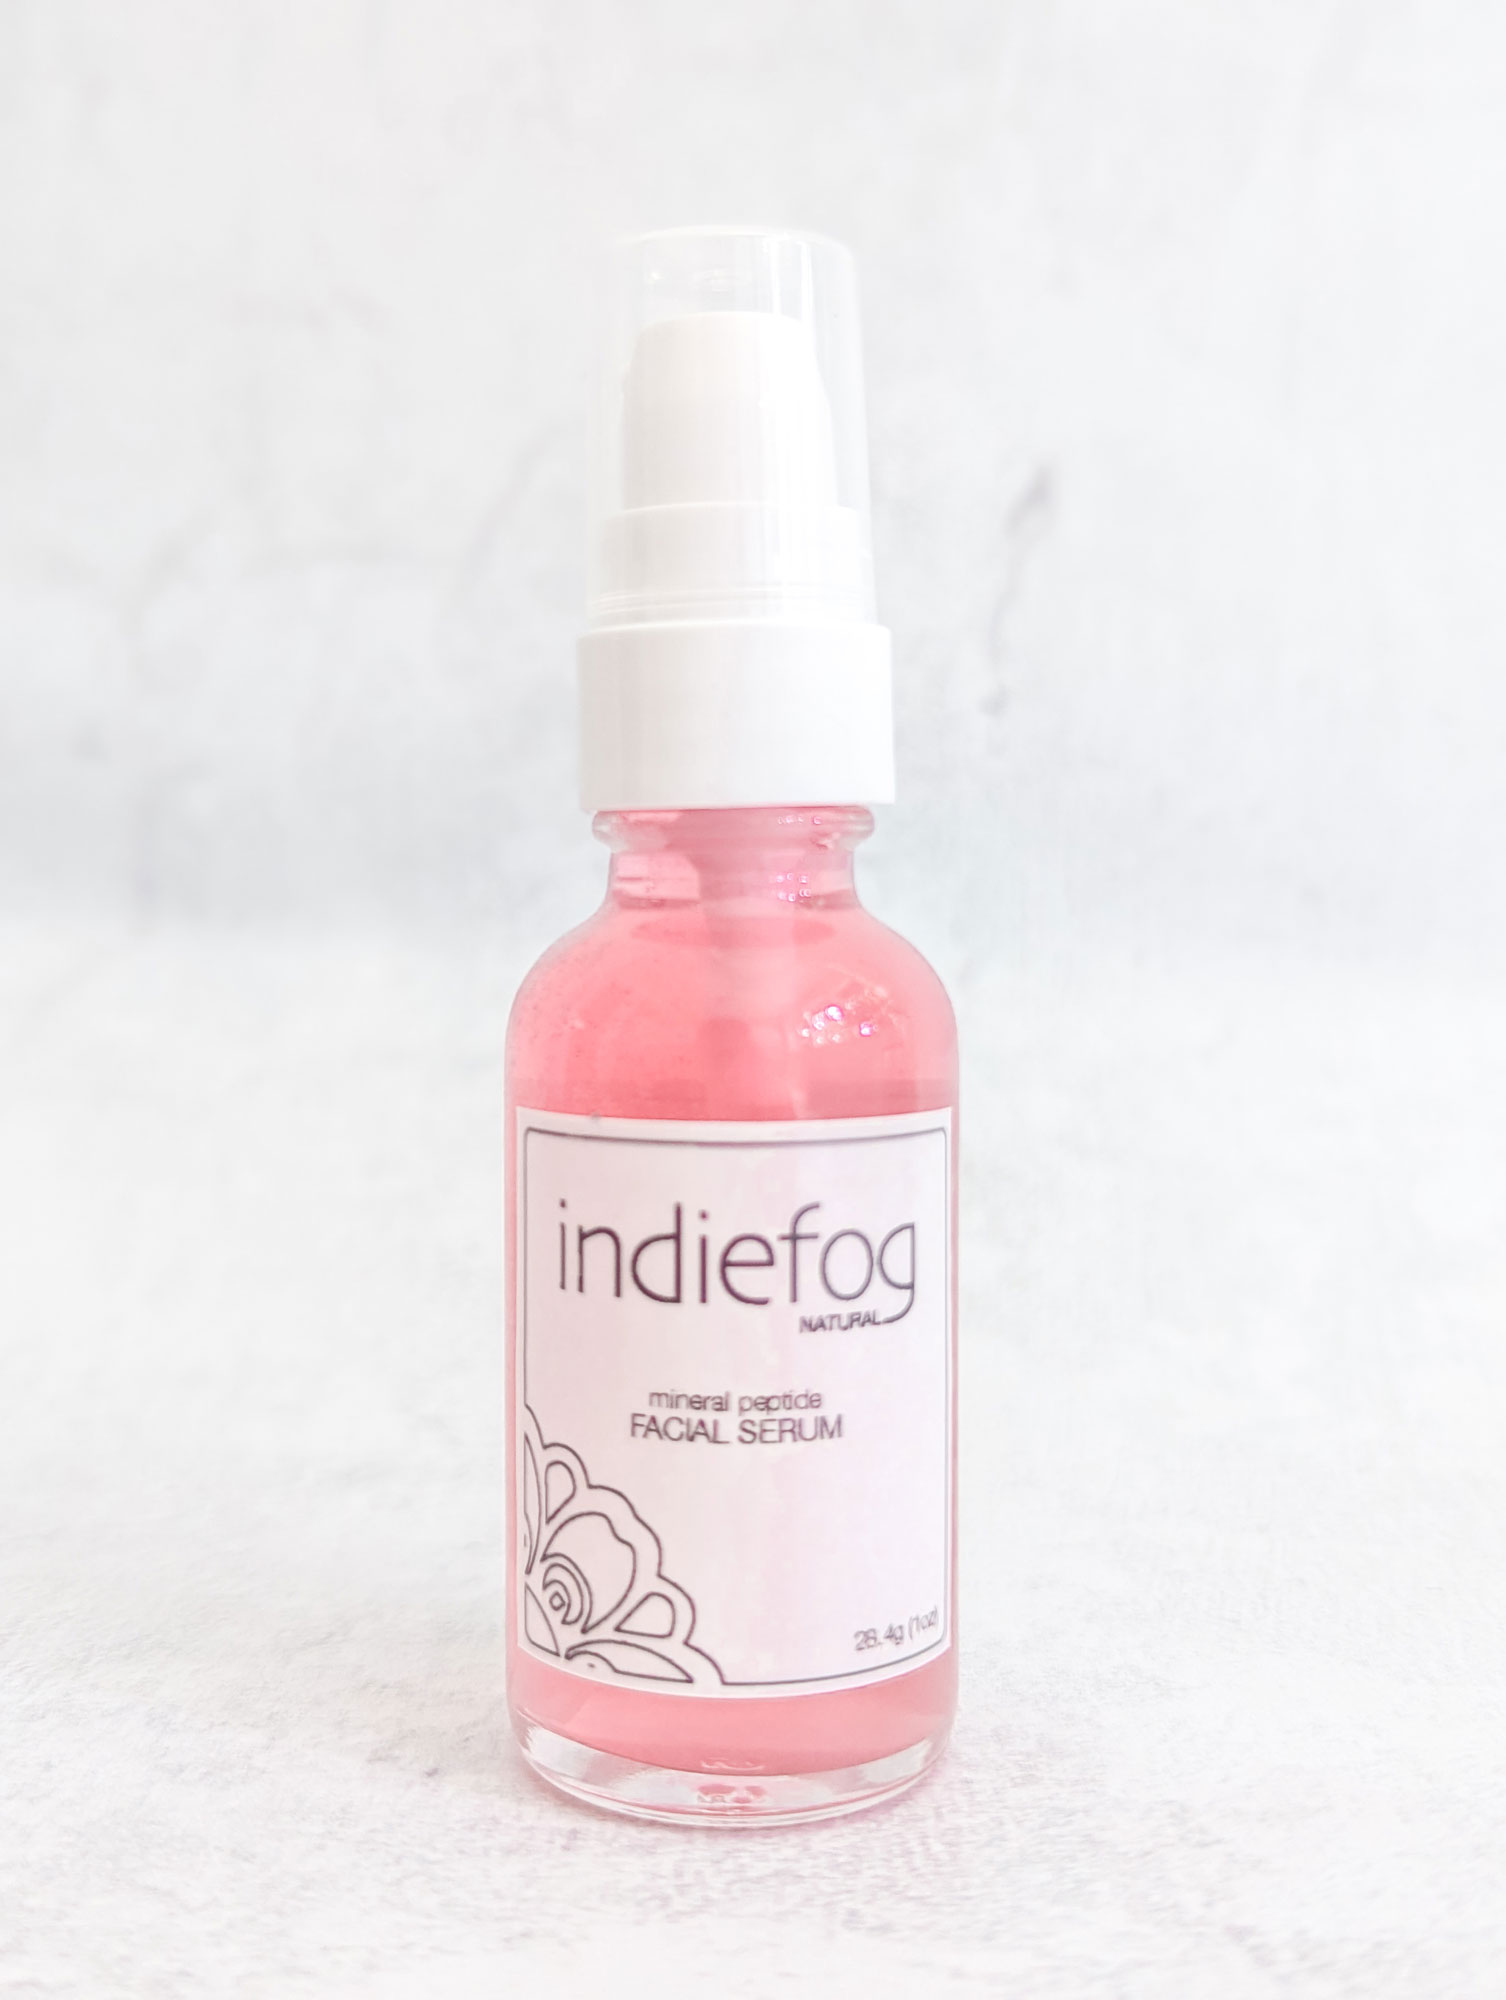 Indiefog Mineral Peptide Facial Serum